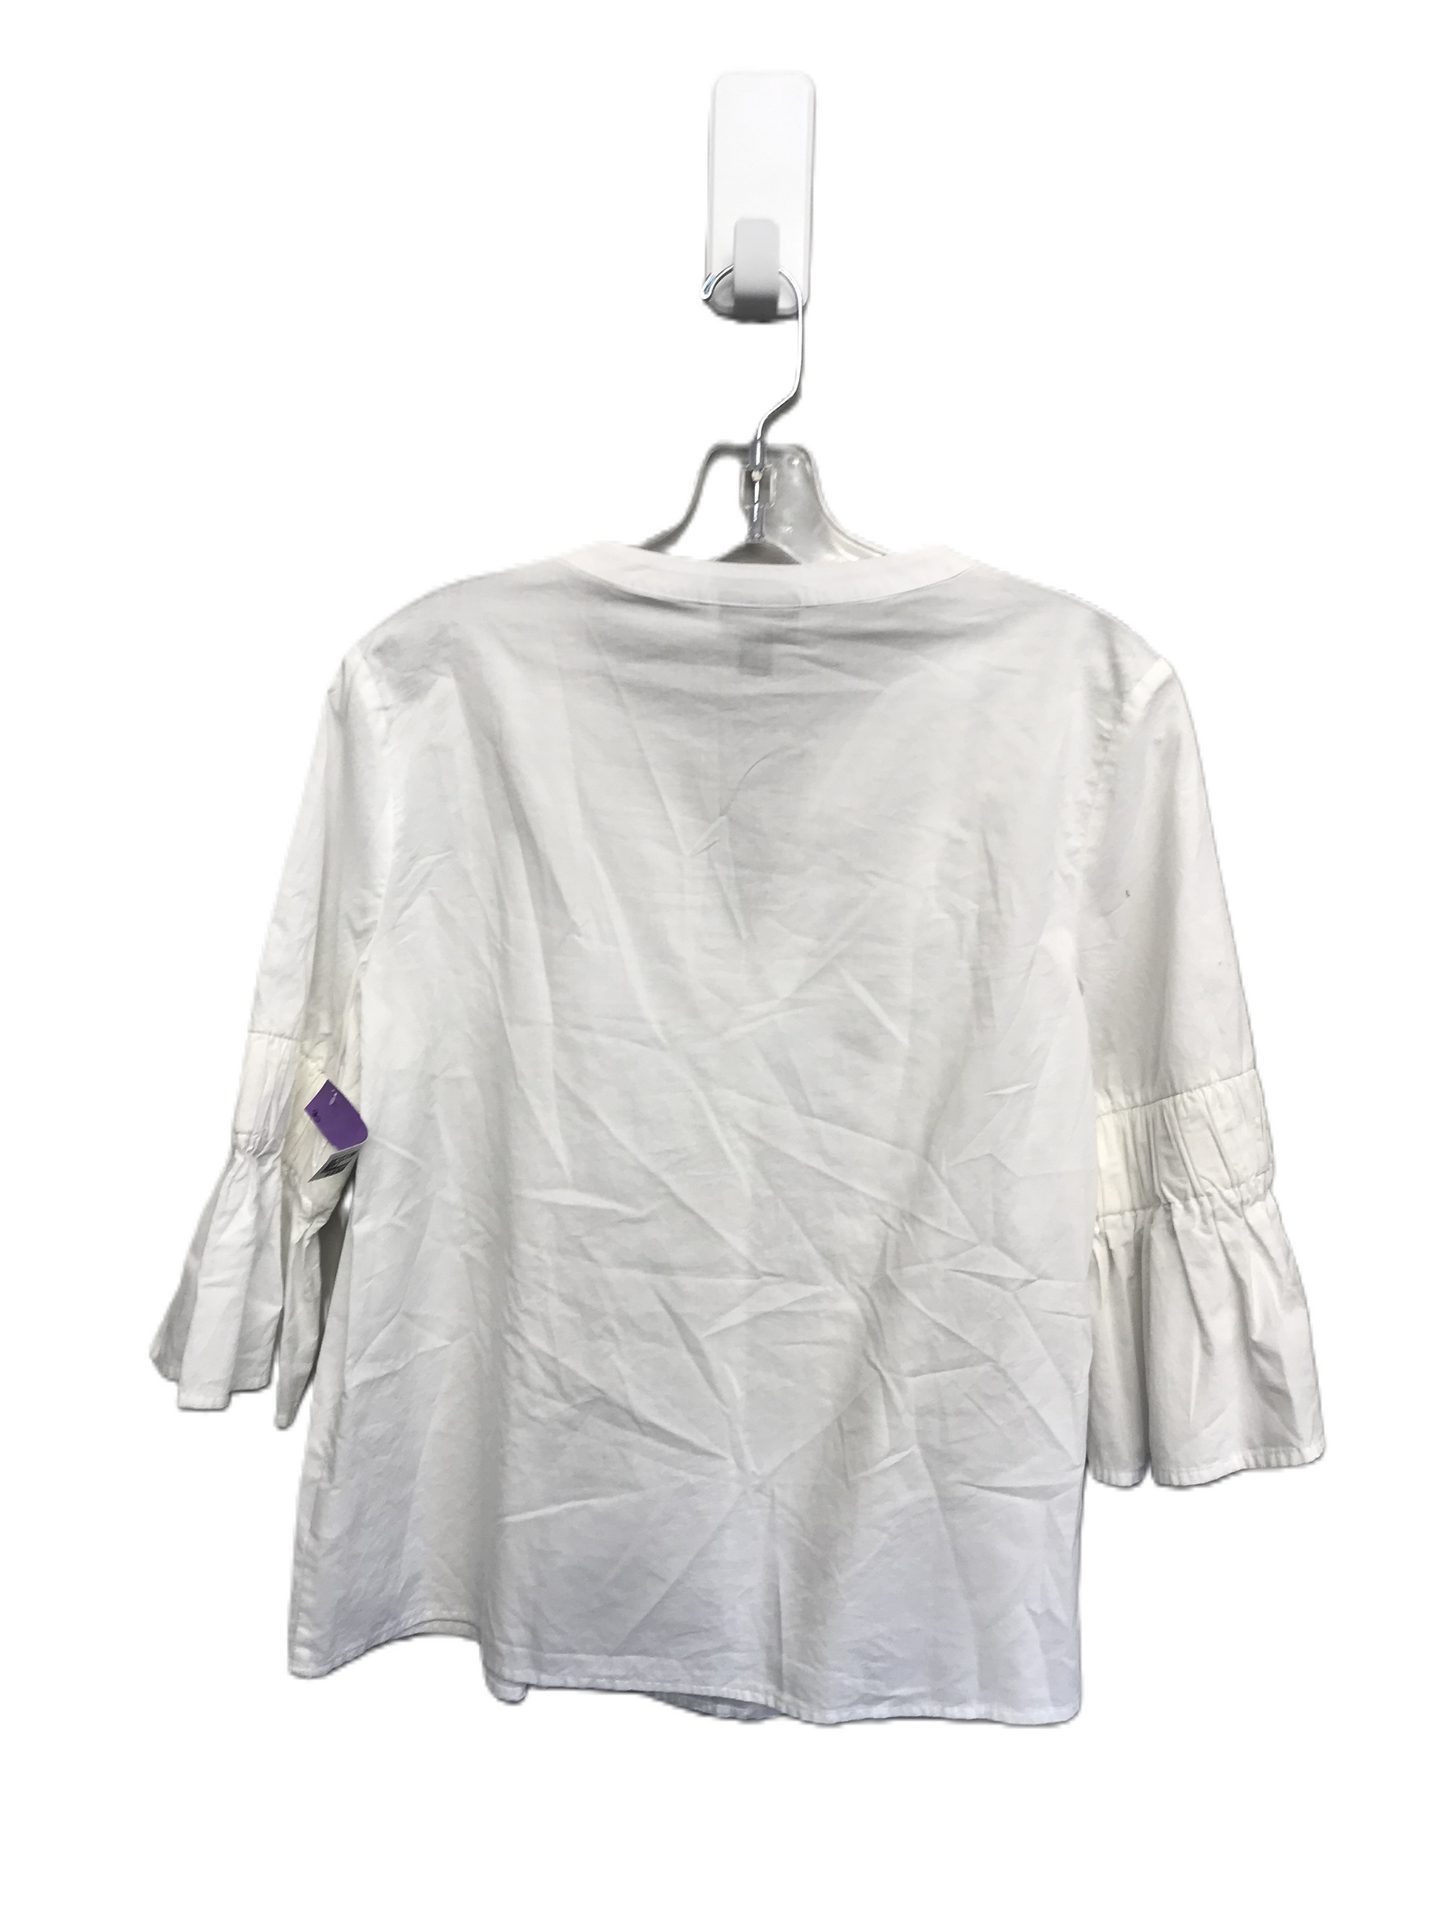 White Top 3/4 Sleeve By Ana, Size: Xs